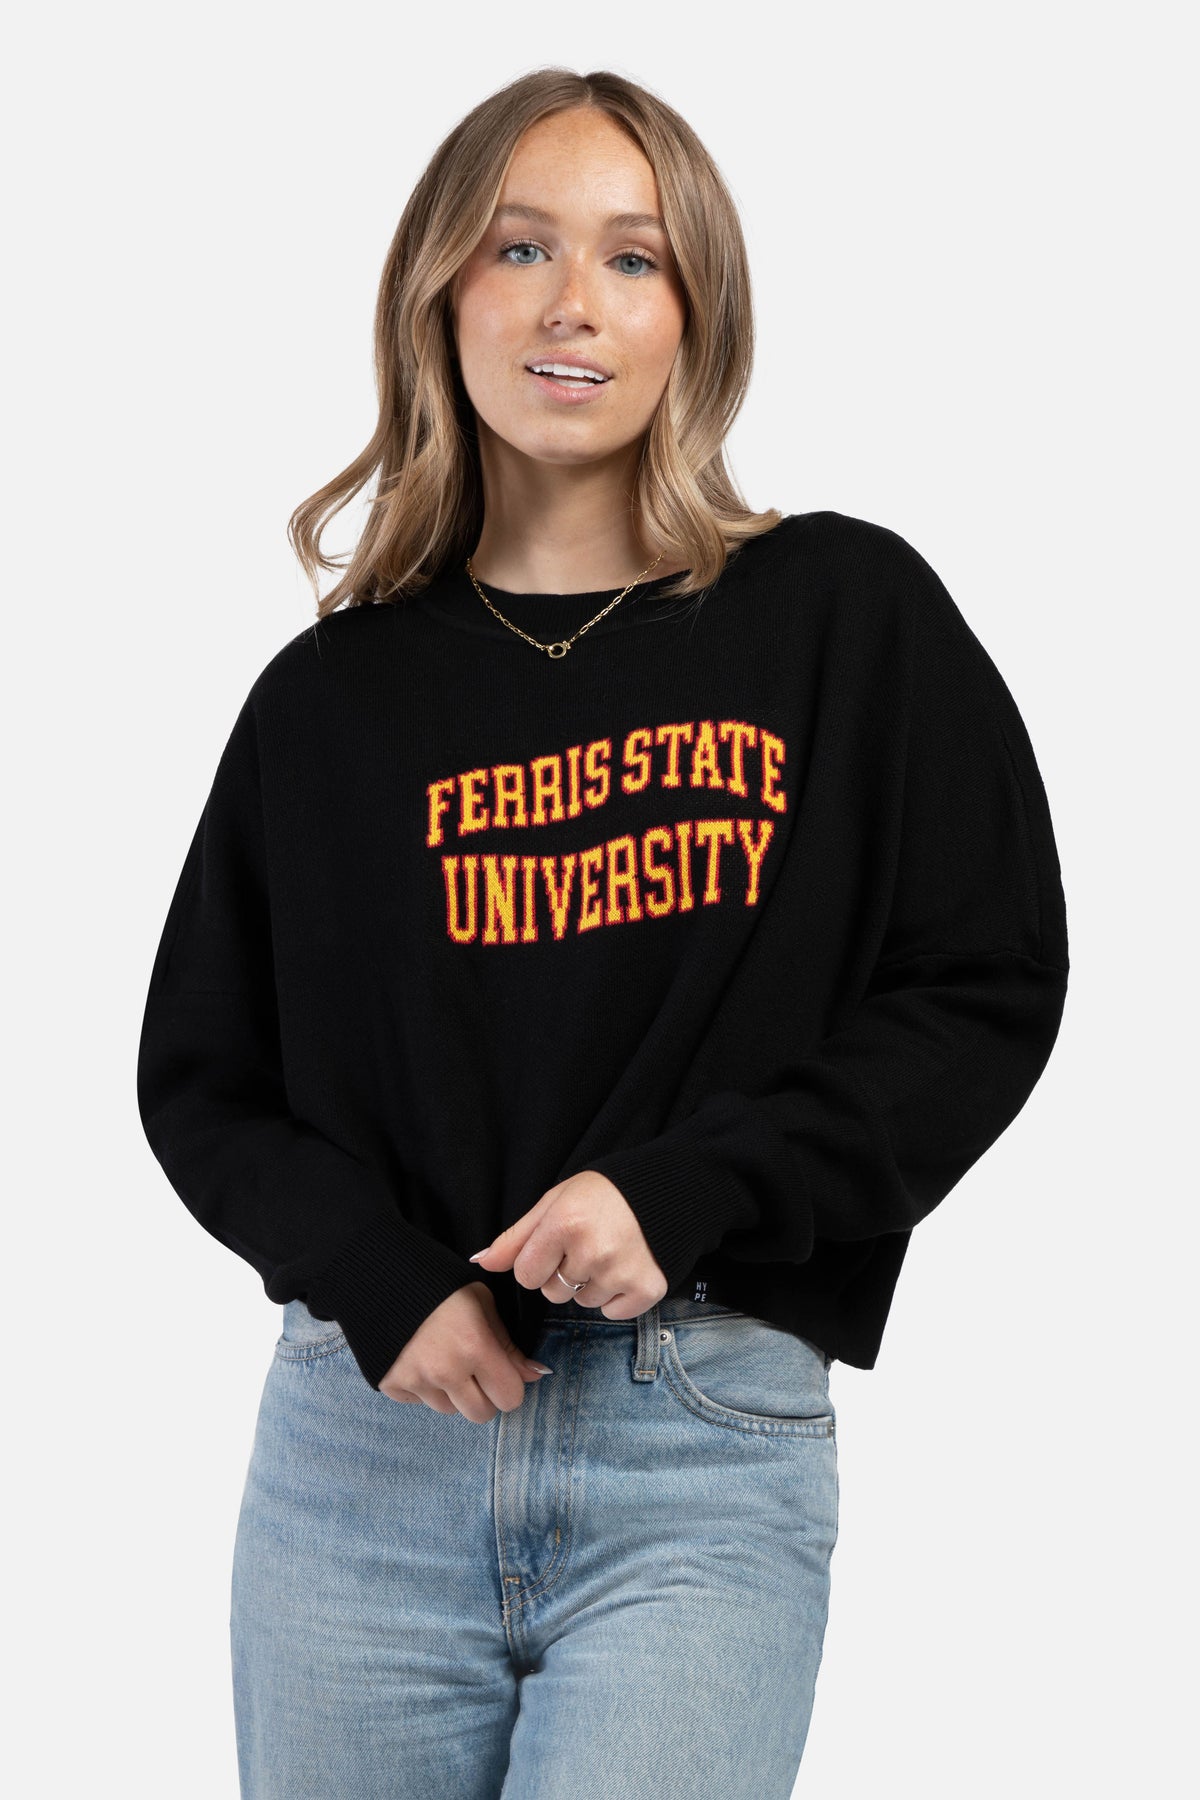 Ferris State Ivy Knitted Sweater